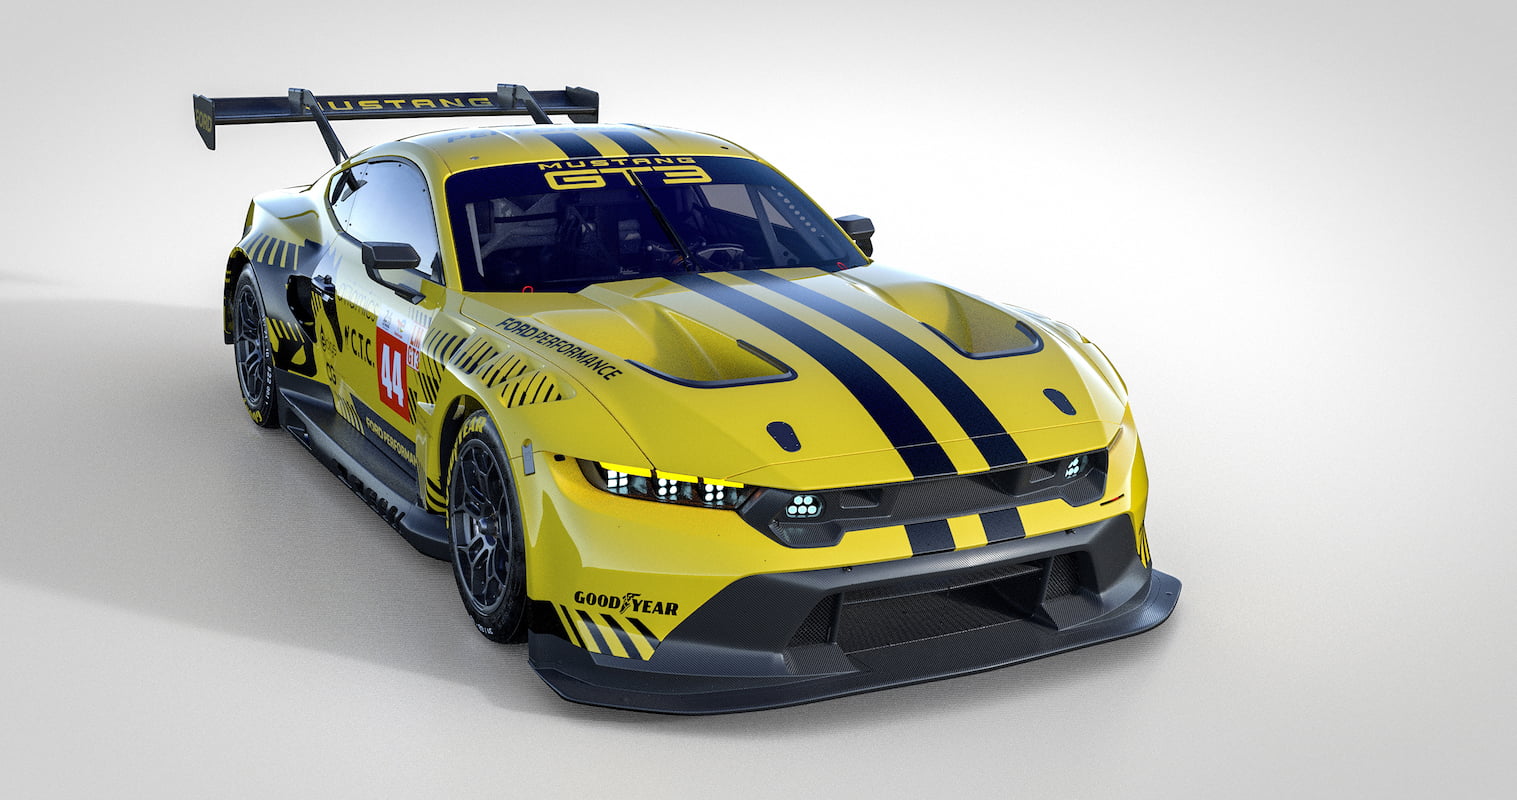 Proton announces Hartshorne for third Ford Mustang at Le Mans